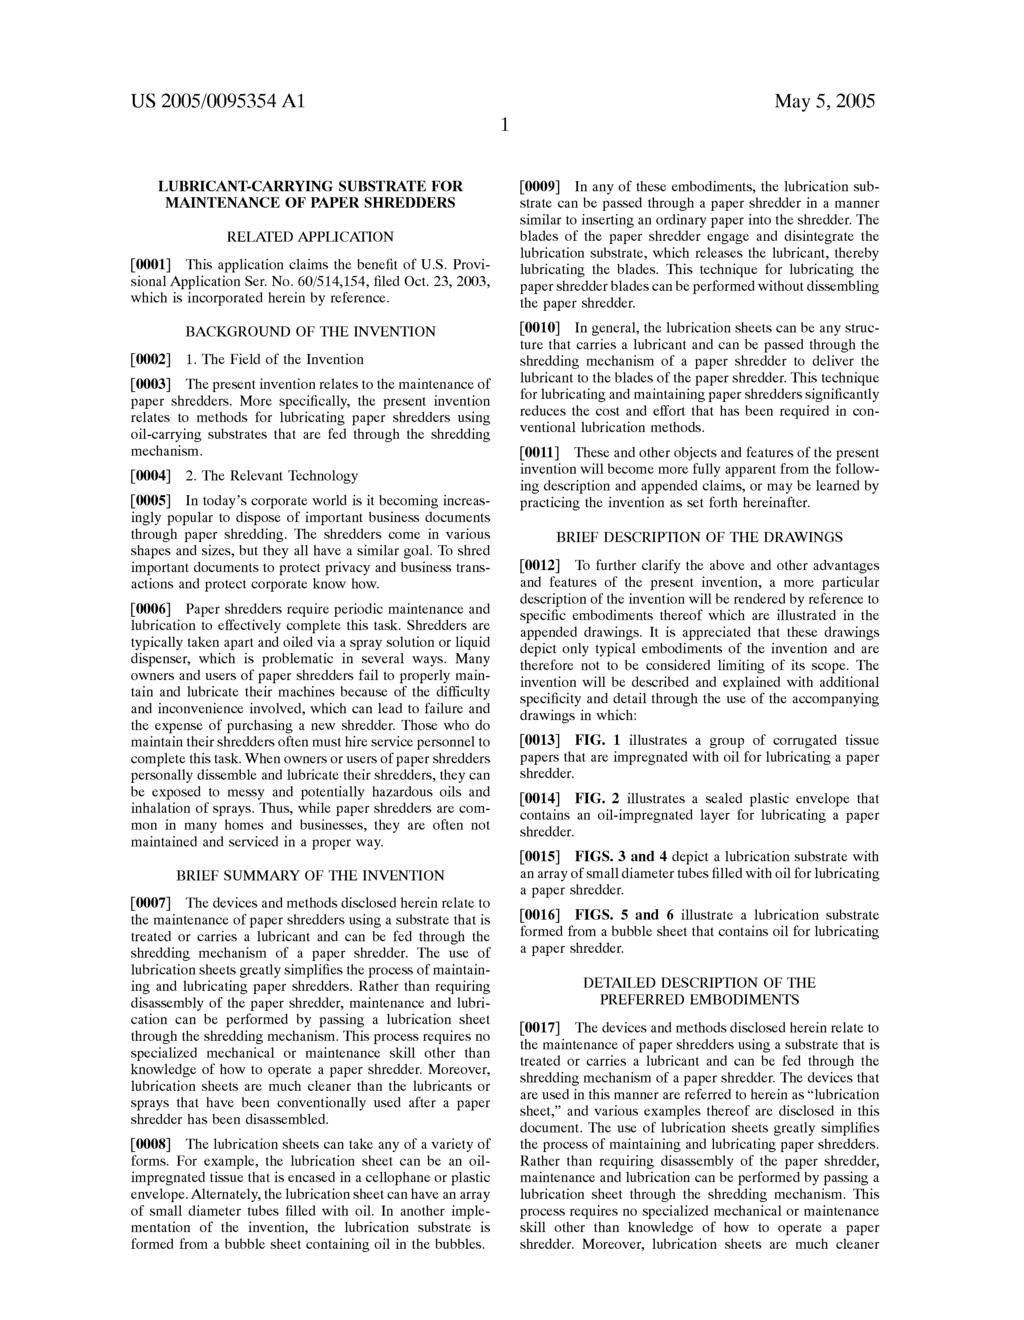 US 2005/0095354 A1 May 5, 2005 LUBRICANT-CARRYING SUBSTRATE FOR MAINTENANCE OF PAPER SHREDDERS RELATED APPLICATION [0001] This application claims the bene?t of US. Provi sional Application Ser. No.